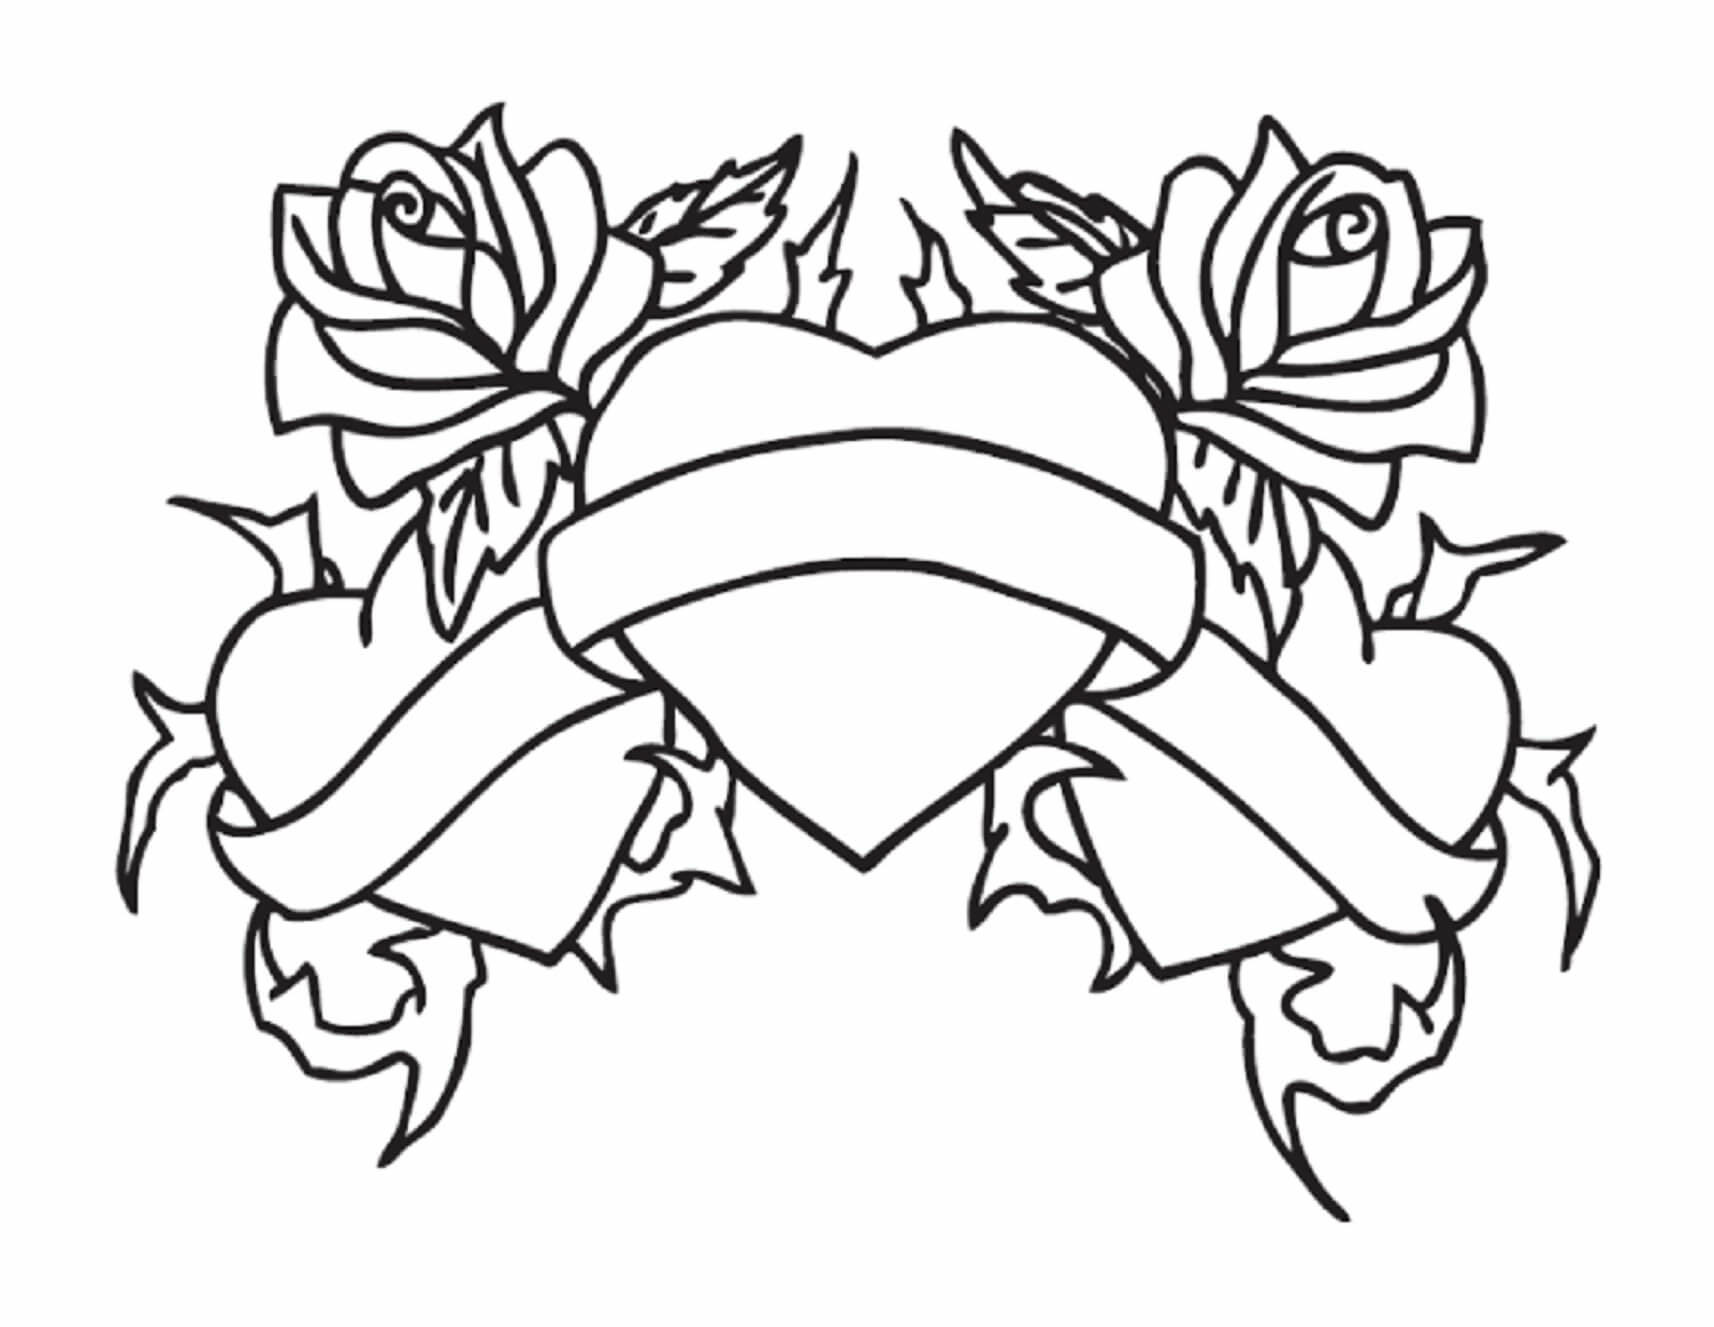 Roses and hears coloring page